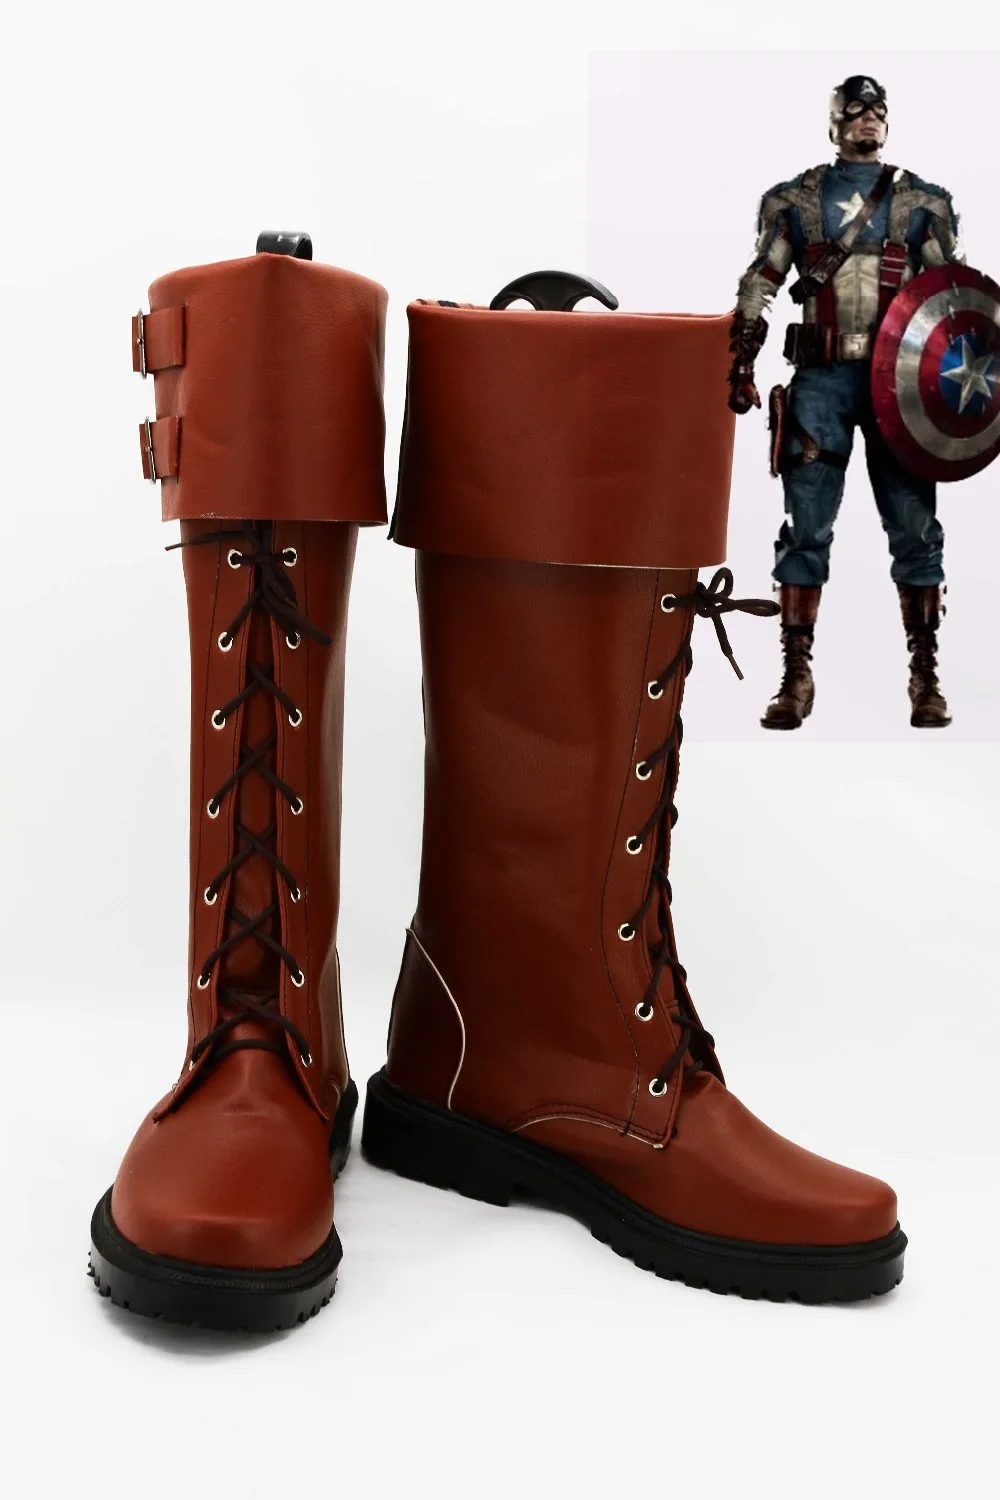 Captain Shoes Deluxe Red PU Boots Fashion Cosplay Costume Accessory